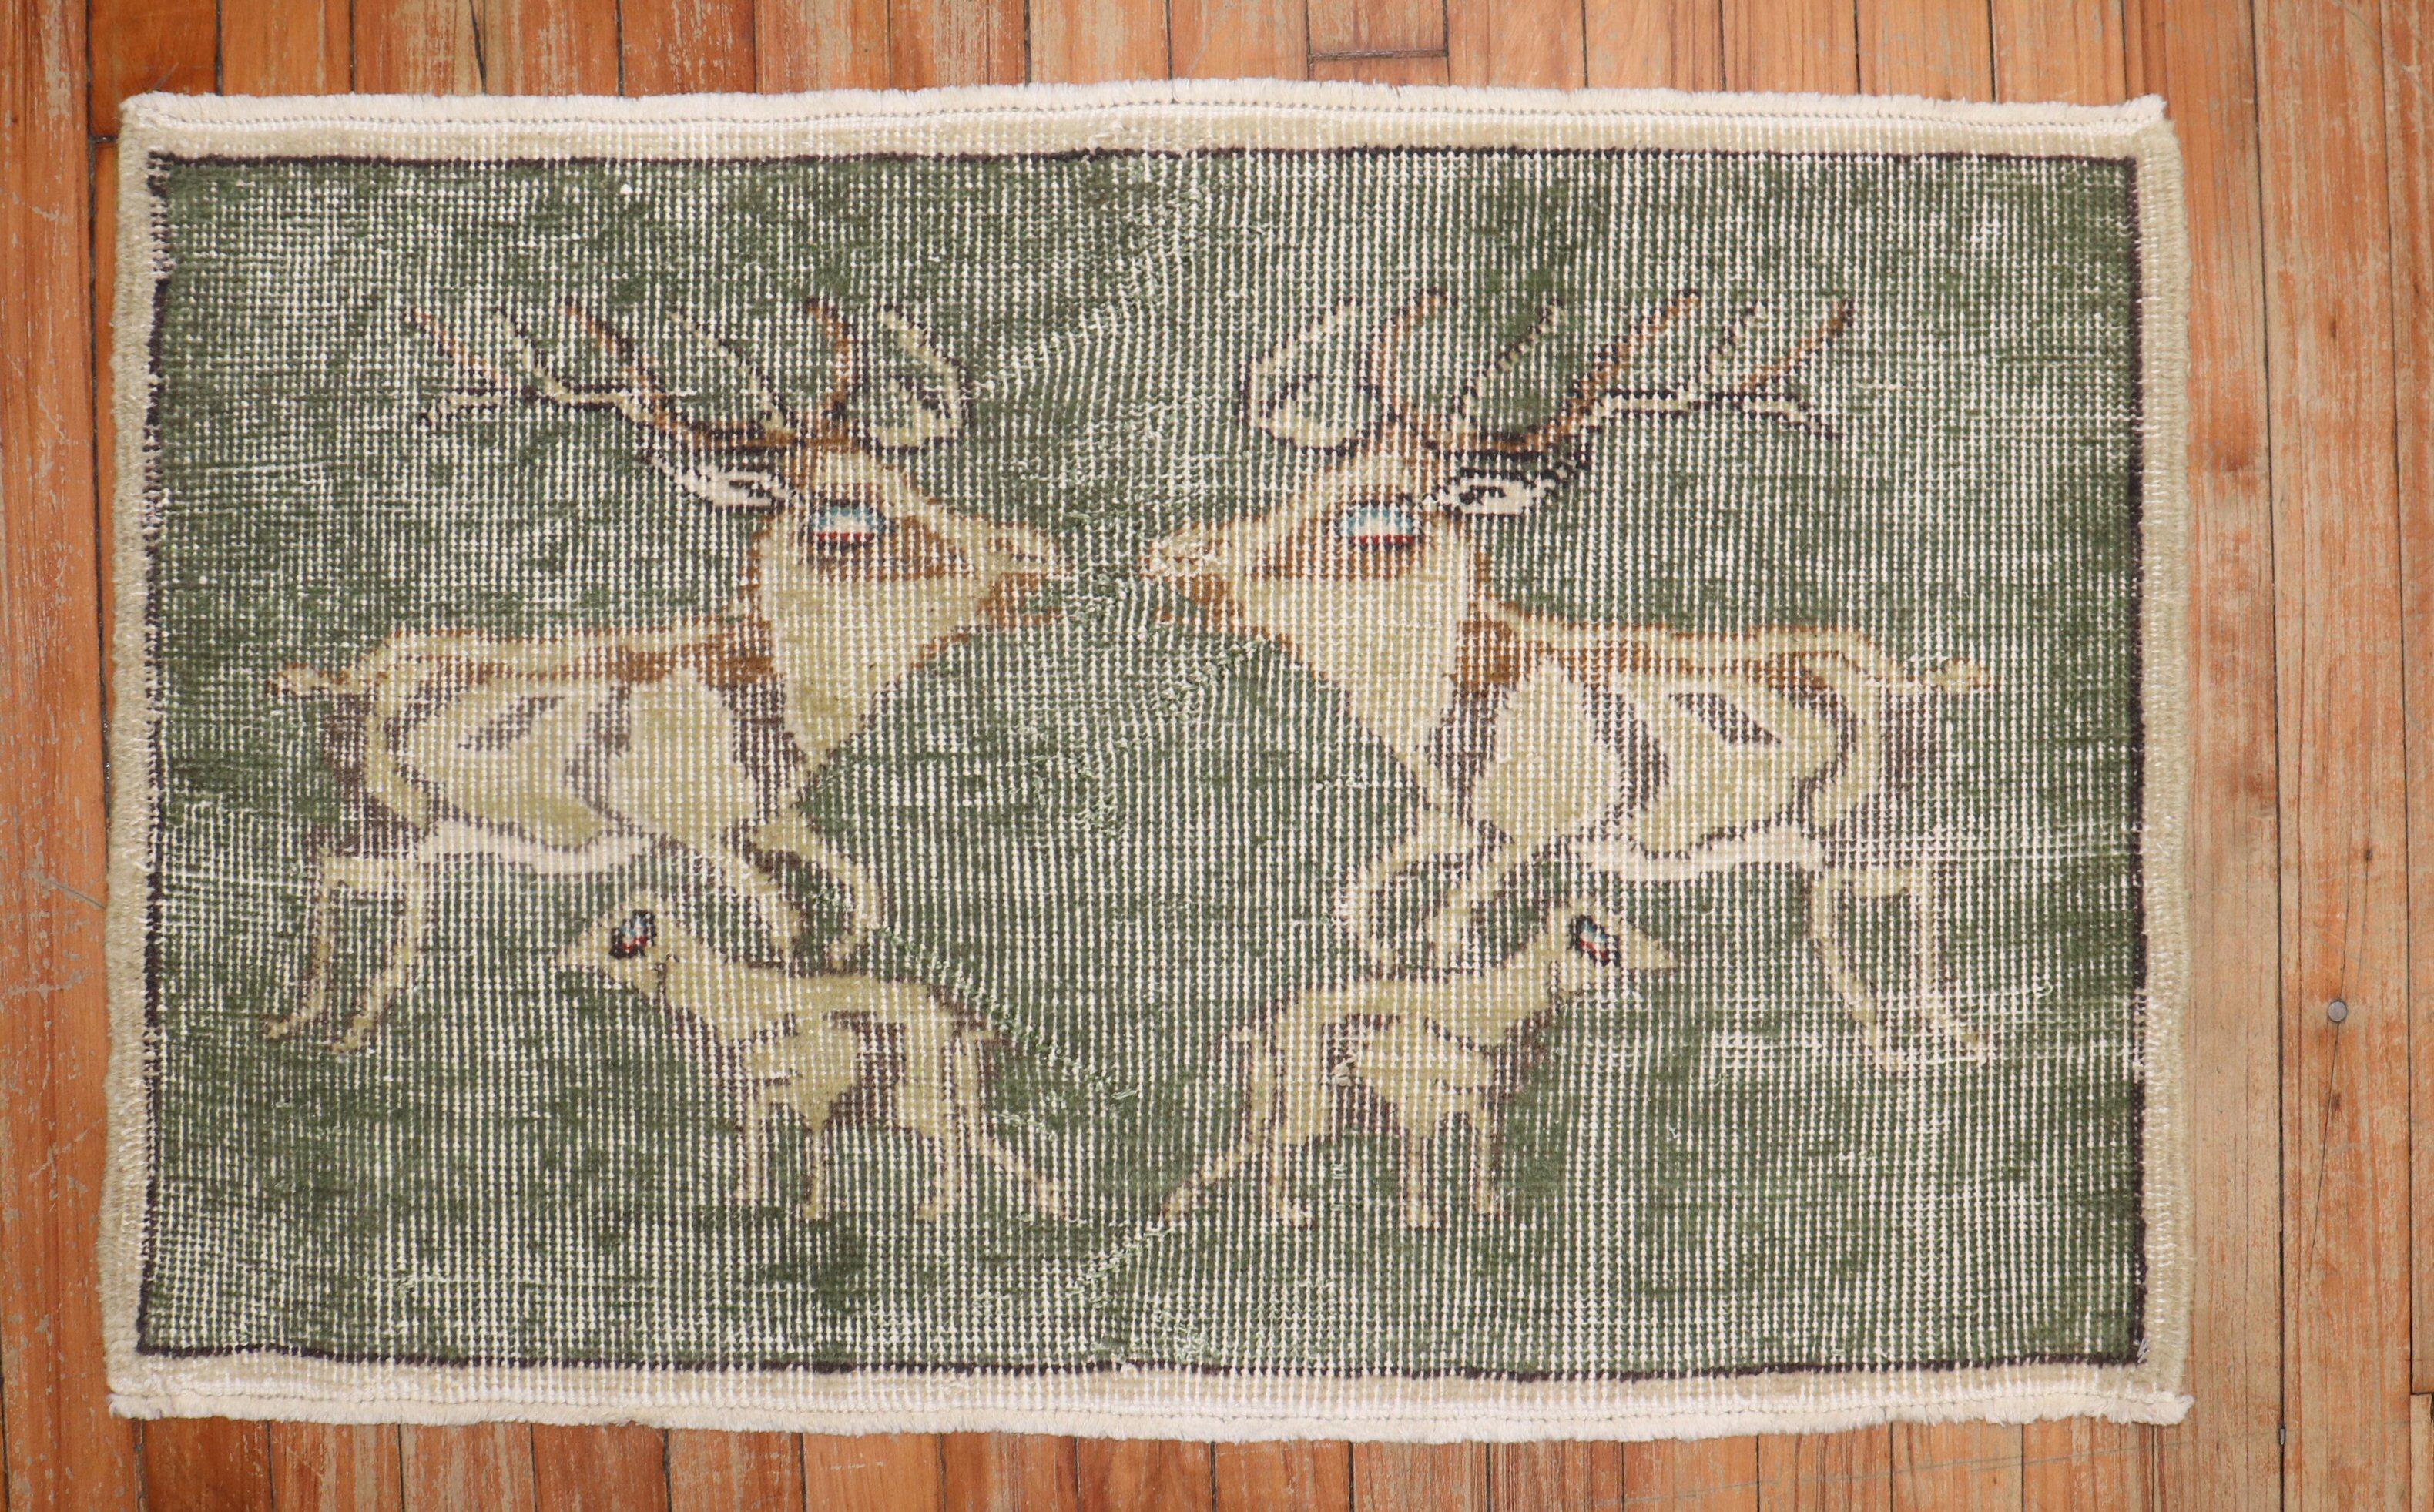 One-of-a-kind hand-knotted Turkish Anatolian rug with 2 deers and 2 other animals on a green ground

Measures: 1'9” x 2'3”.

